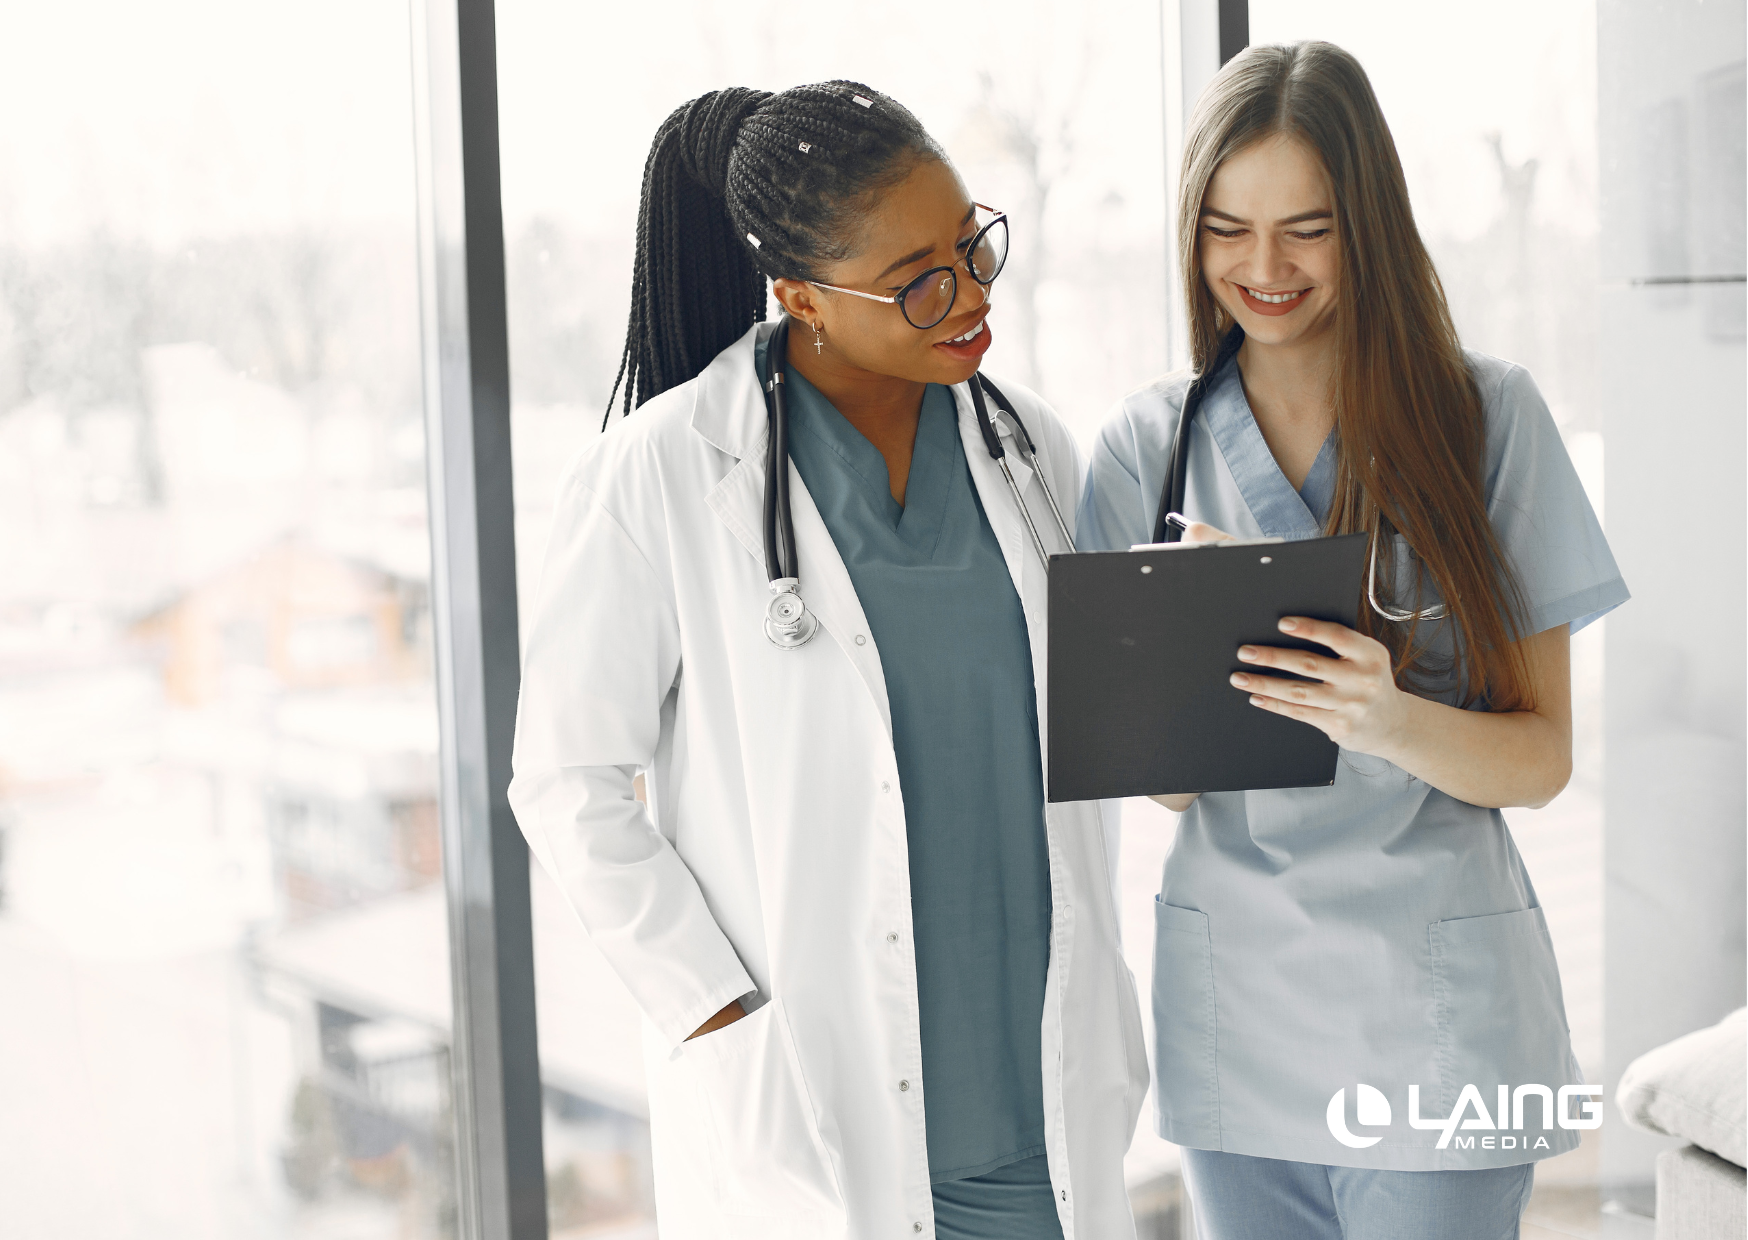 Two women in healthcare looking at a tablet with Laing Media logo on the bottom right corner.